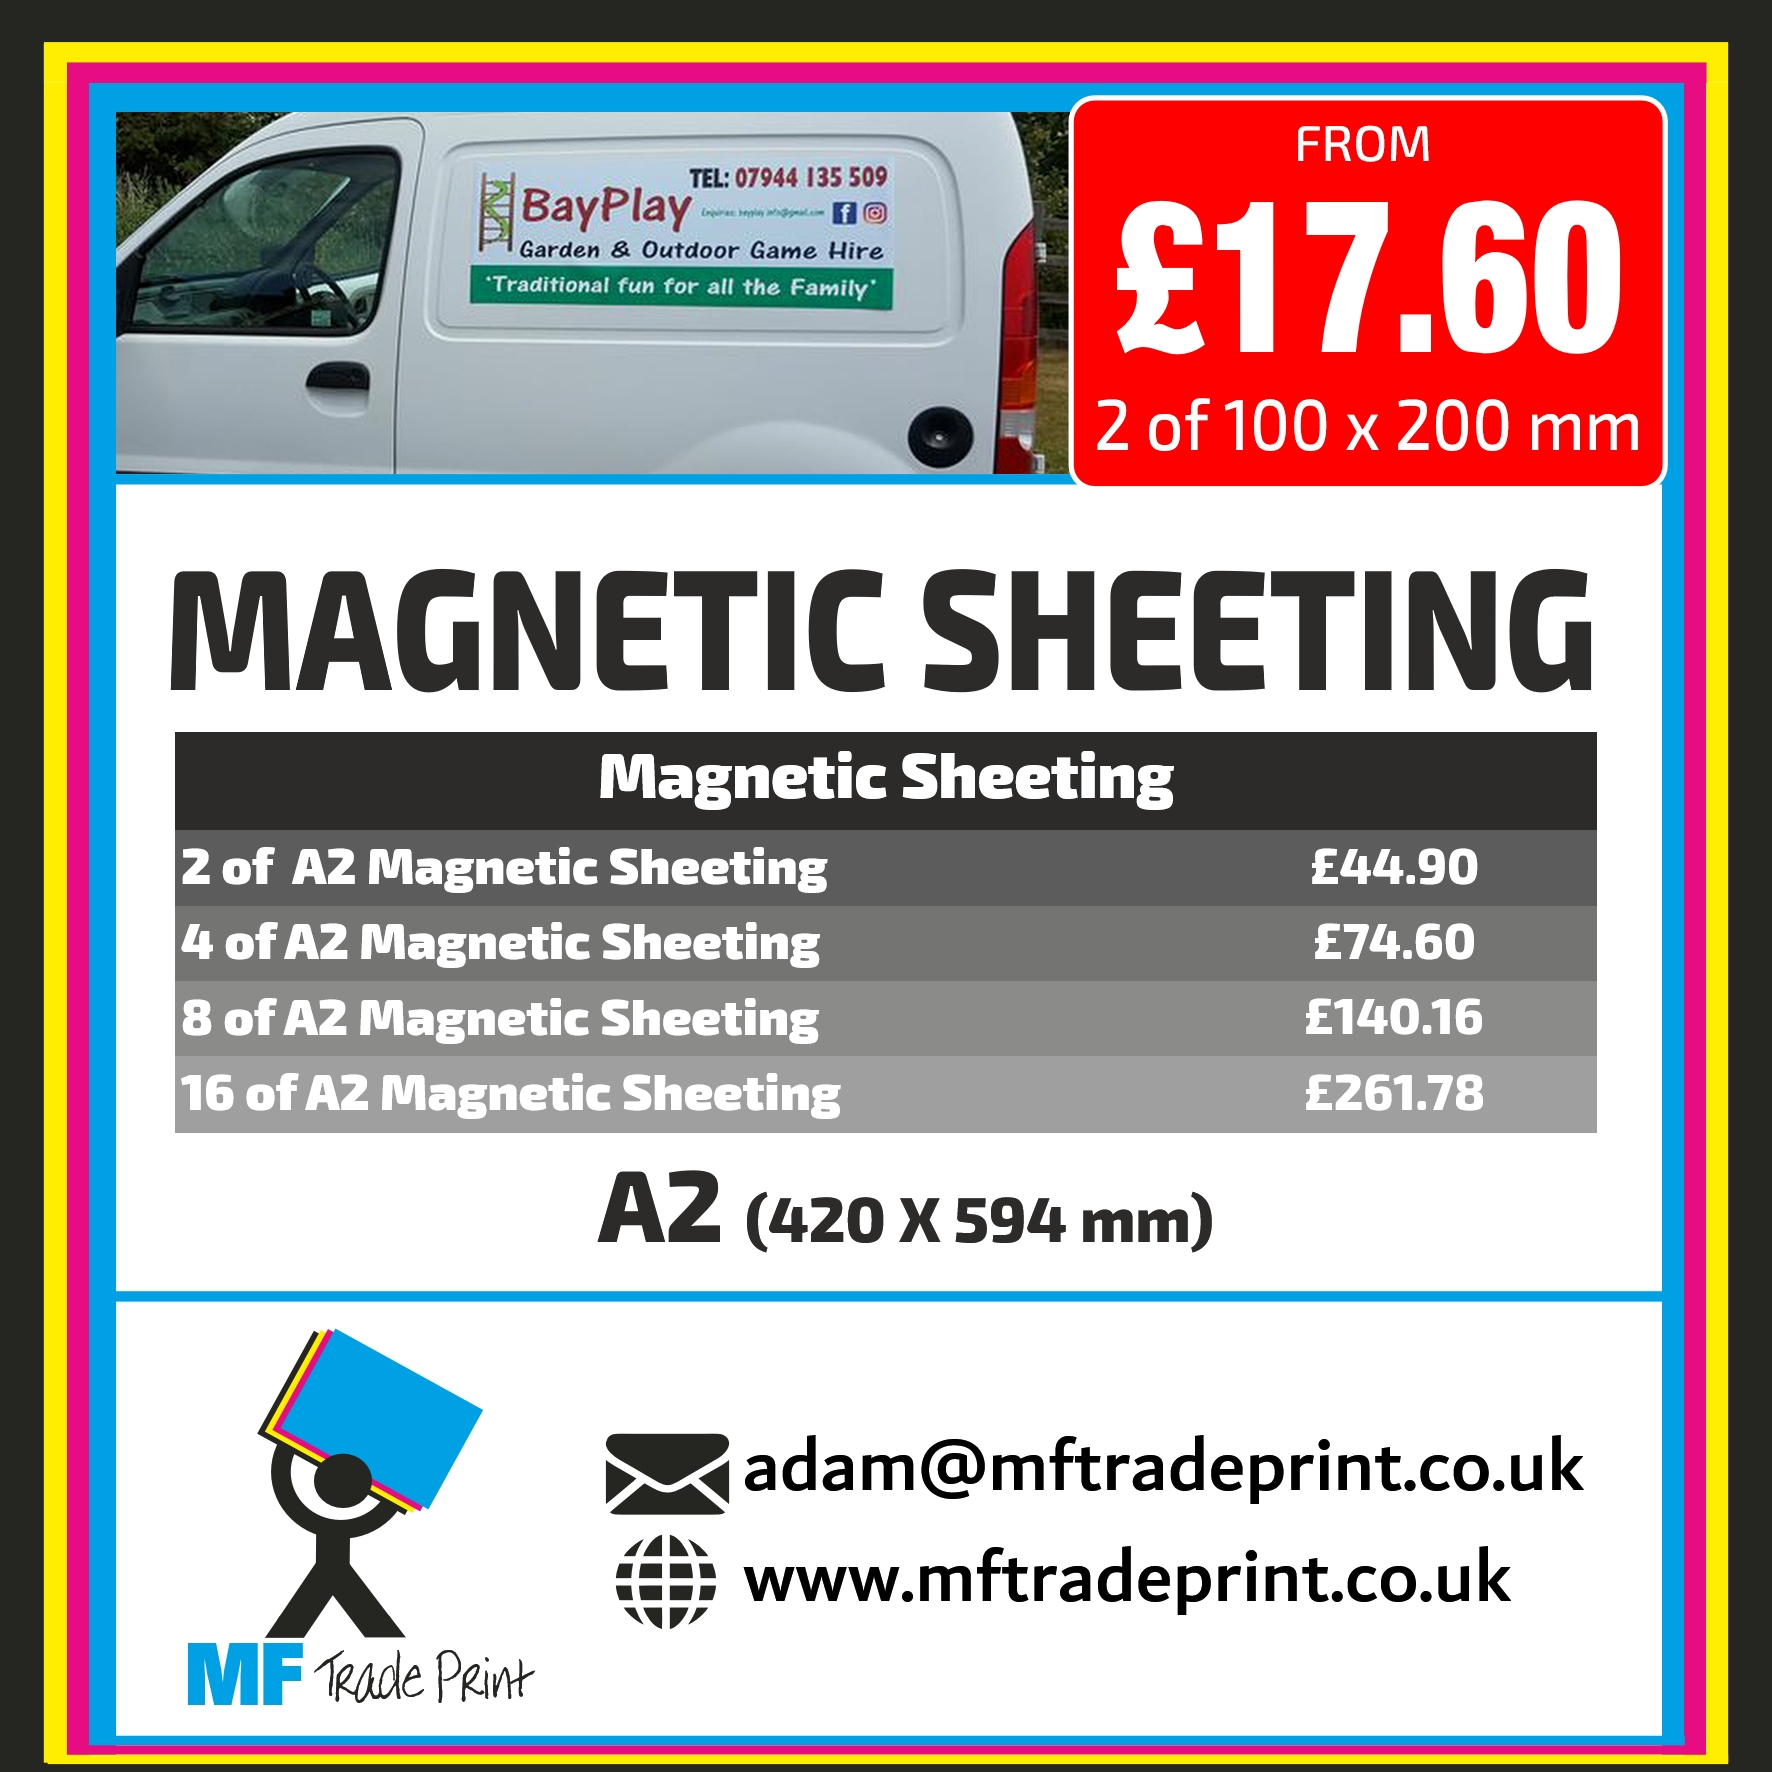 Magnetic sheeting car magnets printed full colour